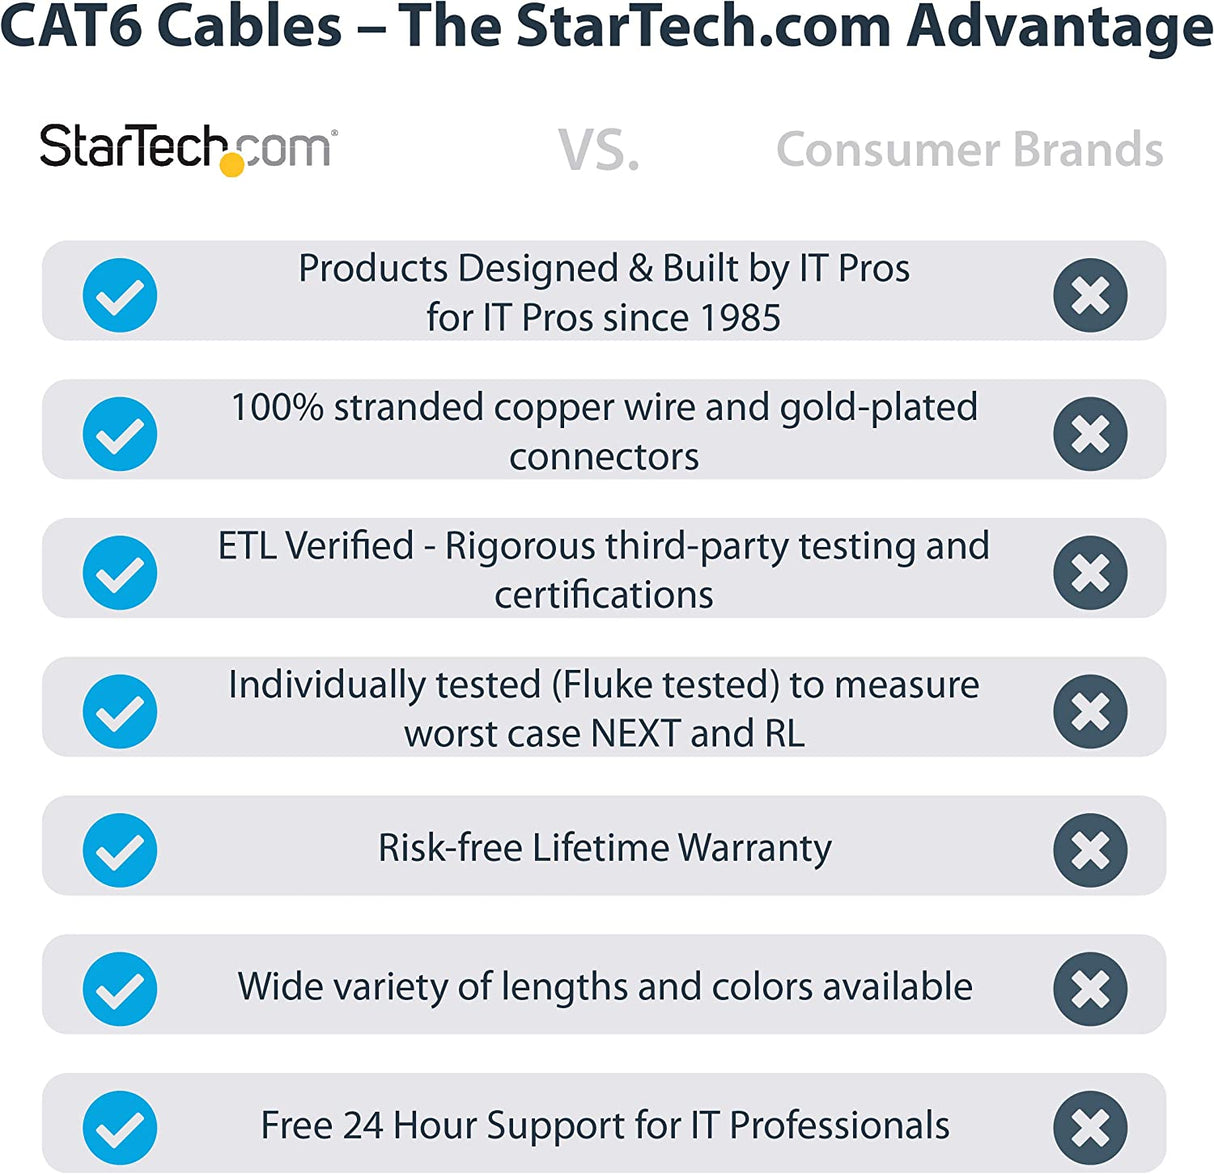 StarTech.com 25ft CAT6 Ethernet Cable - Orange CAT 6 Gigabit Ethernet Wire -650MHz 100W PoE RJ45 UTP Network/Patch Cord Snagless w/Strain Relief Fluke Tested/Wiring is UL Certified/TIA (N6PATCH25OR) Orange 25 ft / 7.6 m 1 Pack